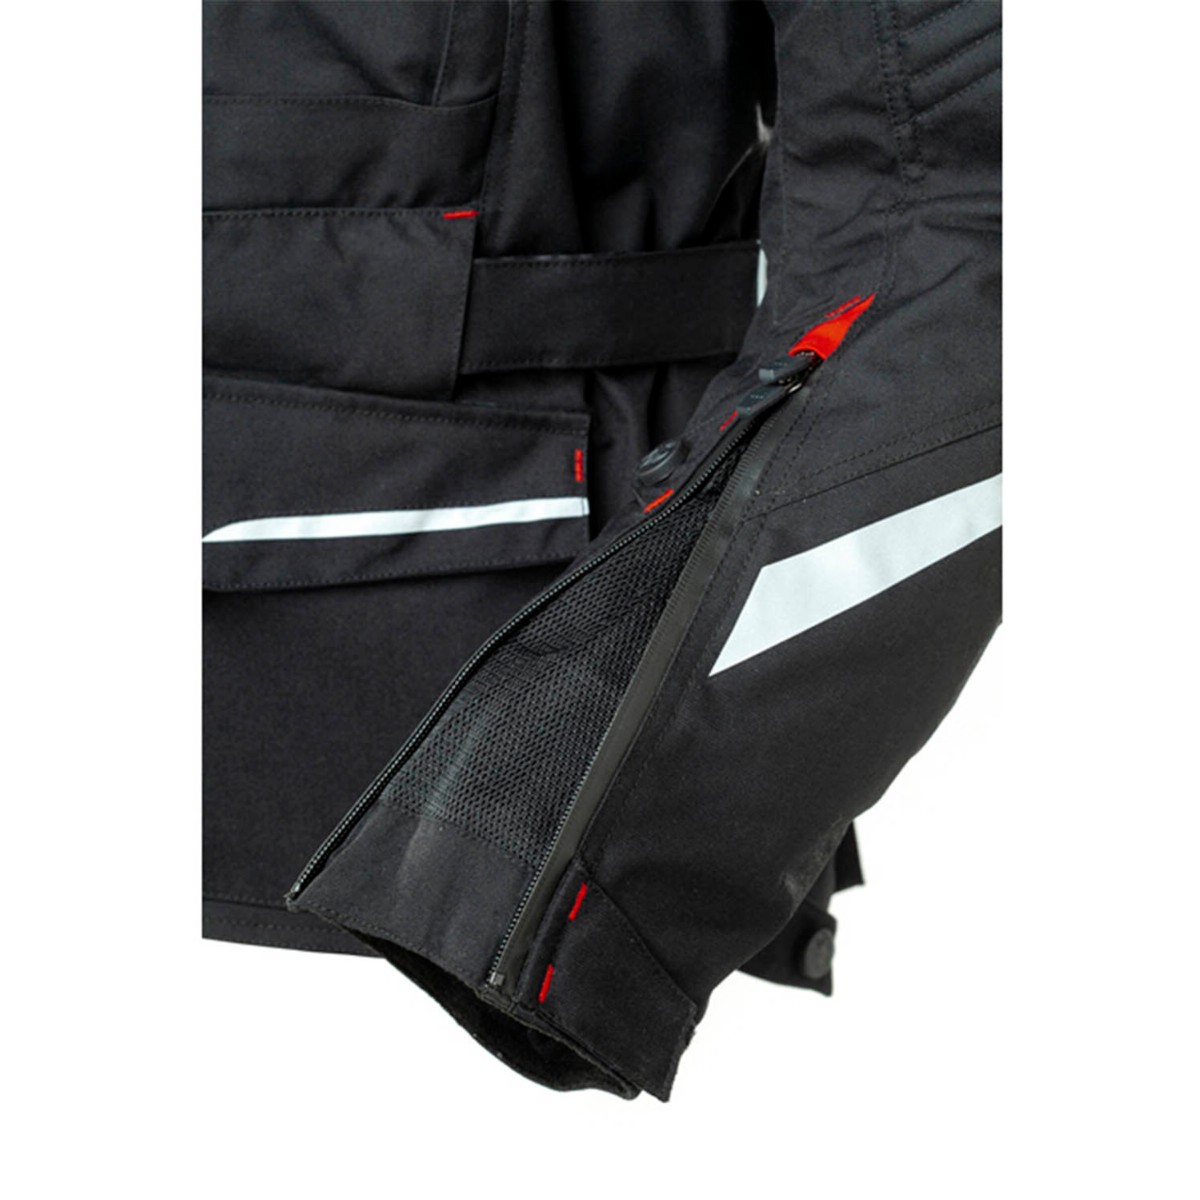 Chaqueta RAINERS TANGER NEGRA INVIERNO Impermeable 3